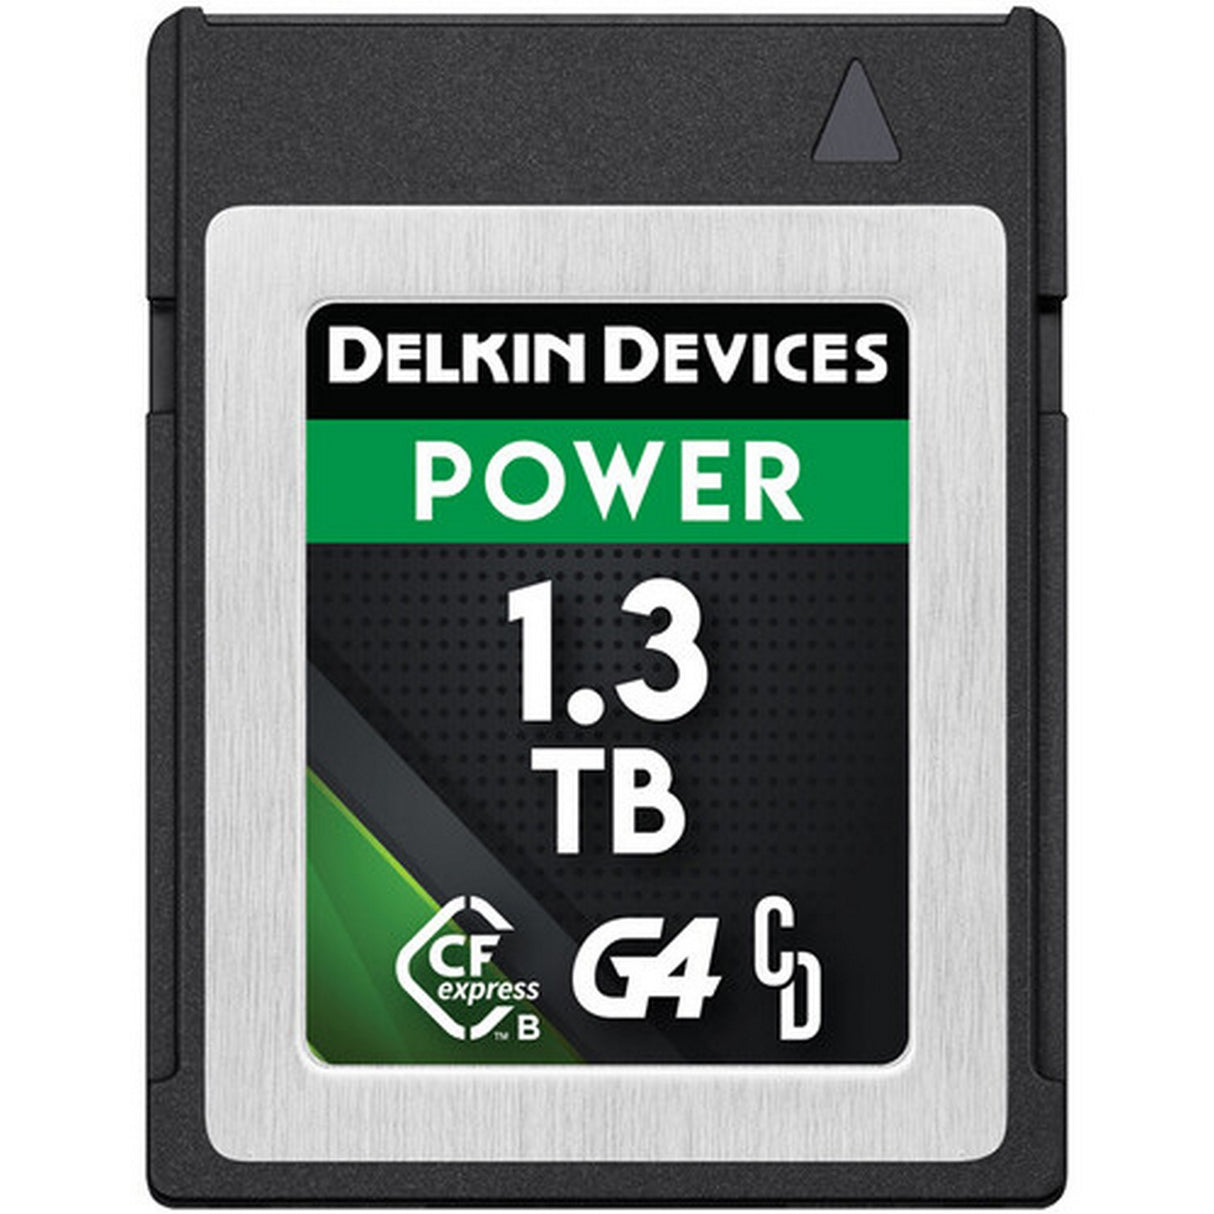 Delkin Devices CFexpresss Power Type B Memory Card, 1.3TB